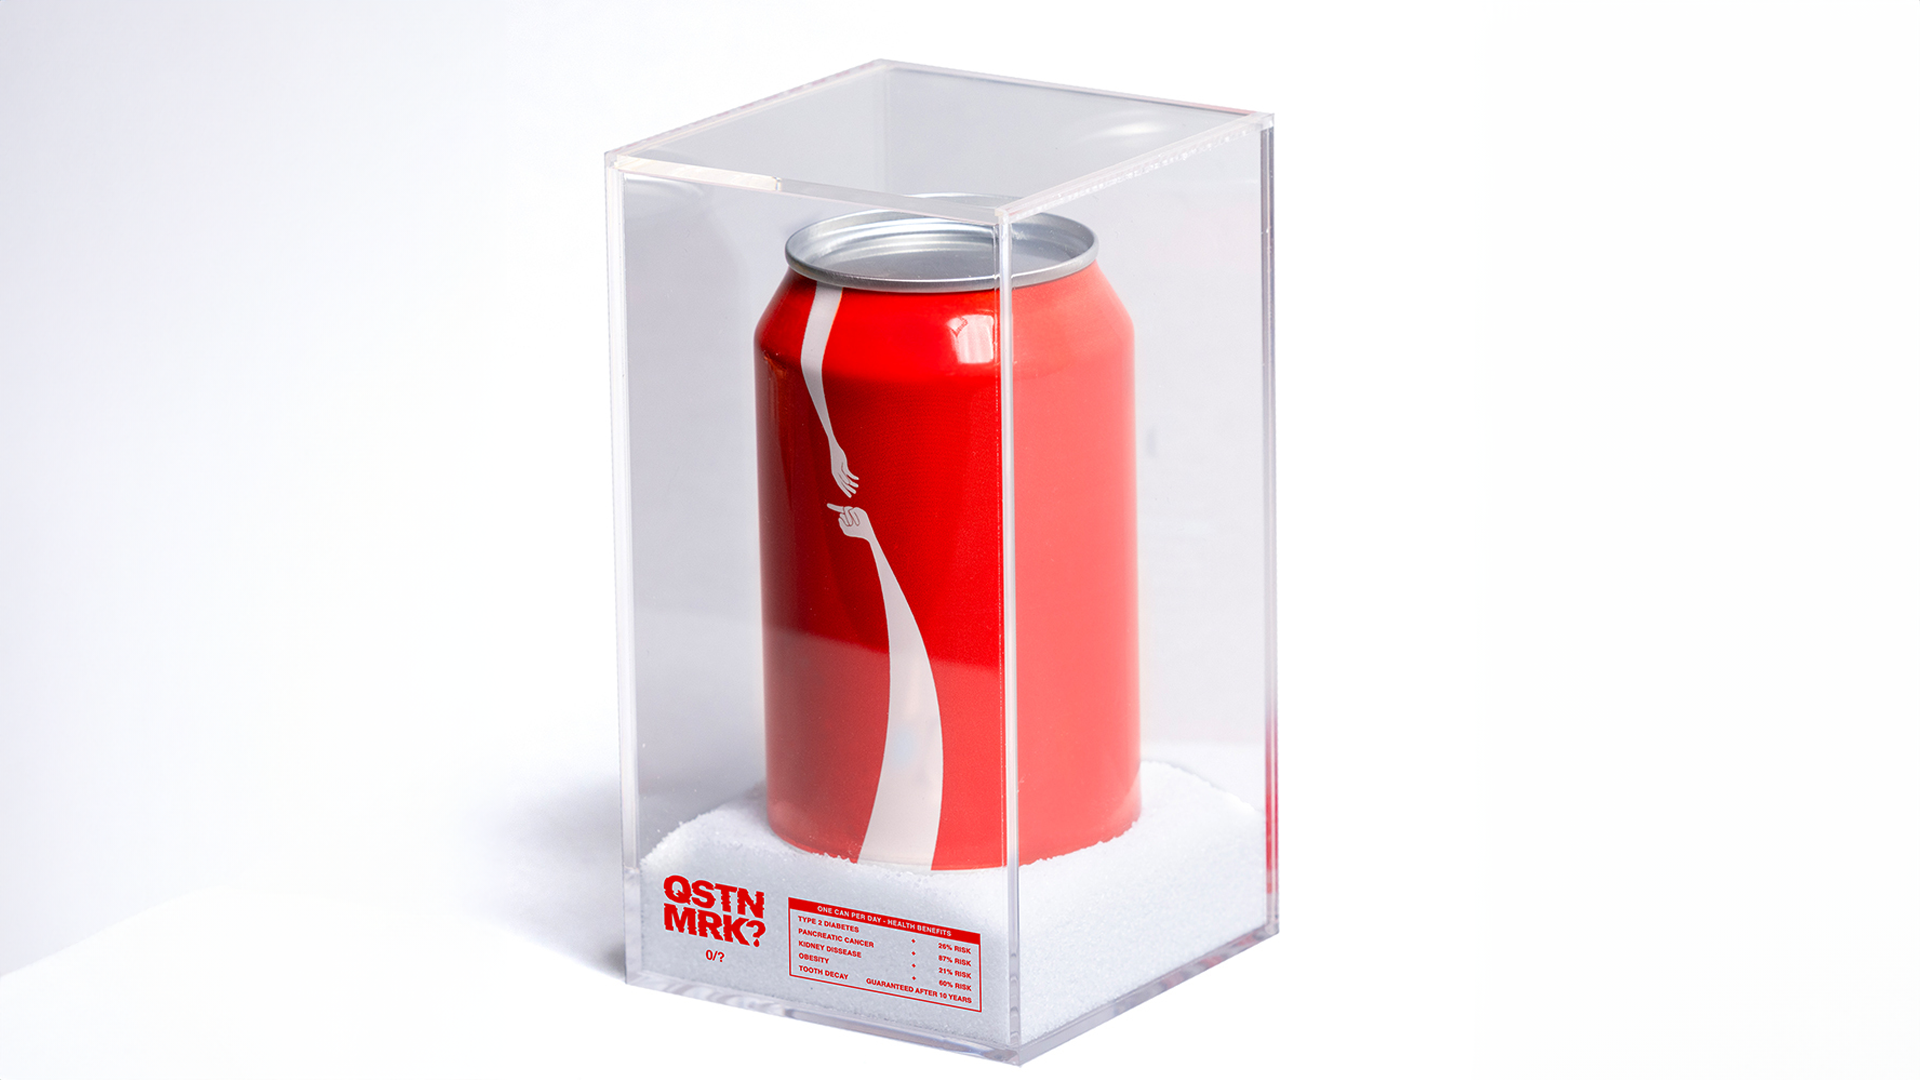 Artists Made a Can of Undrinkable Coca-Cola— But Why?